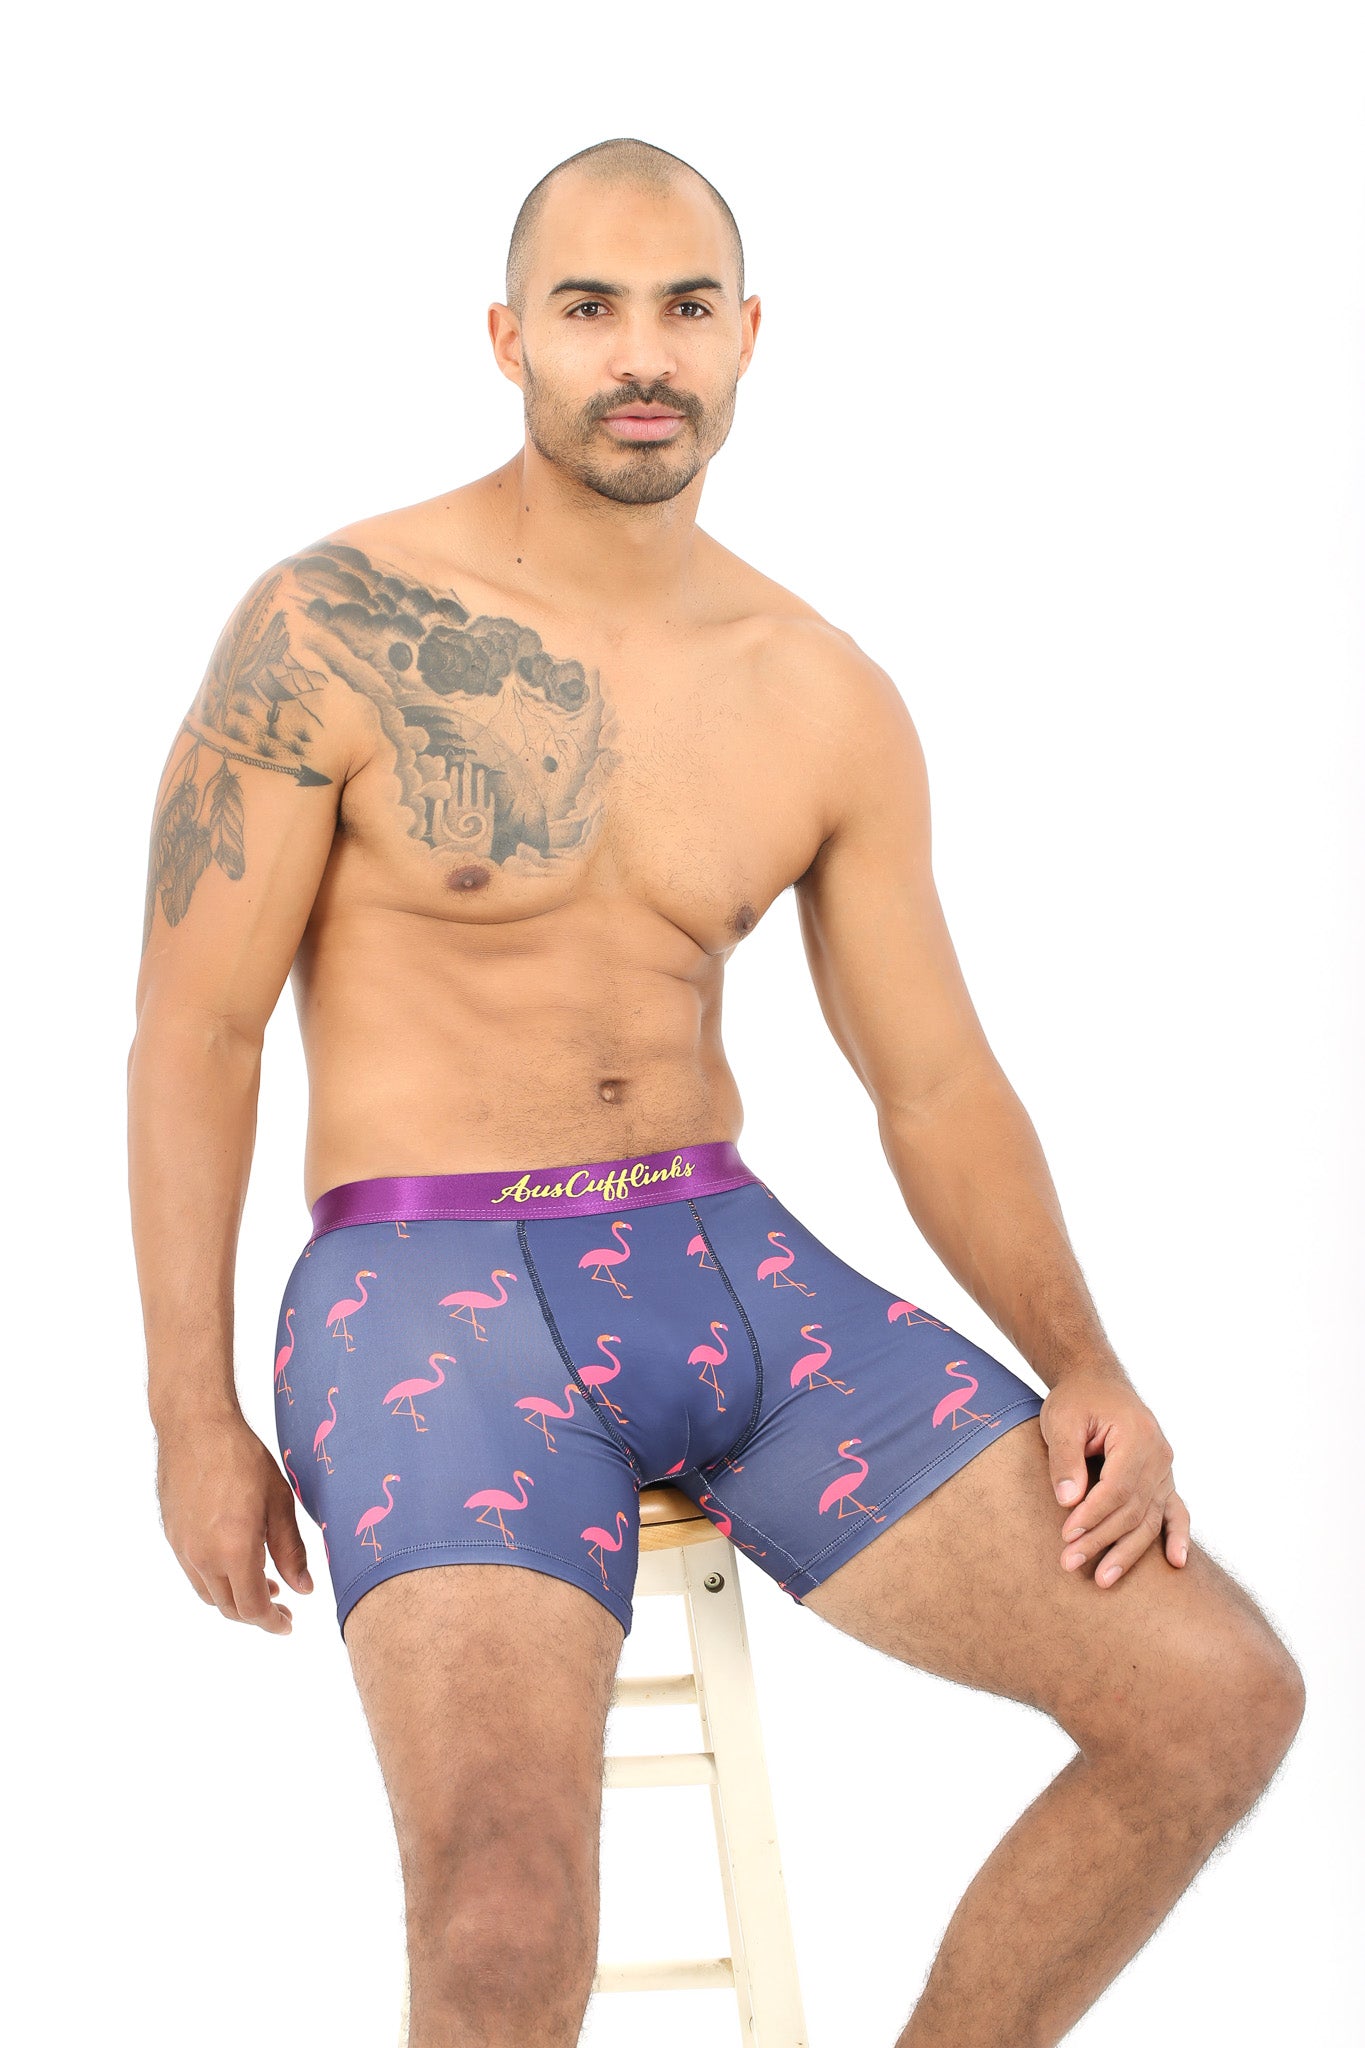 A bald man with a chest tattoo, wearing Blue Boxer Briefs with the Pink Flamingo Underwear pattern, sits on a white stool against a white background.